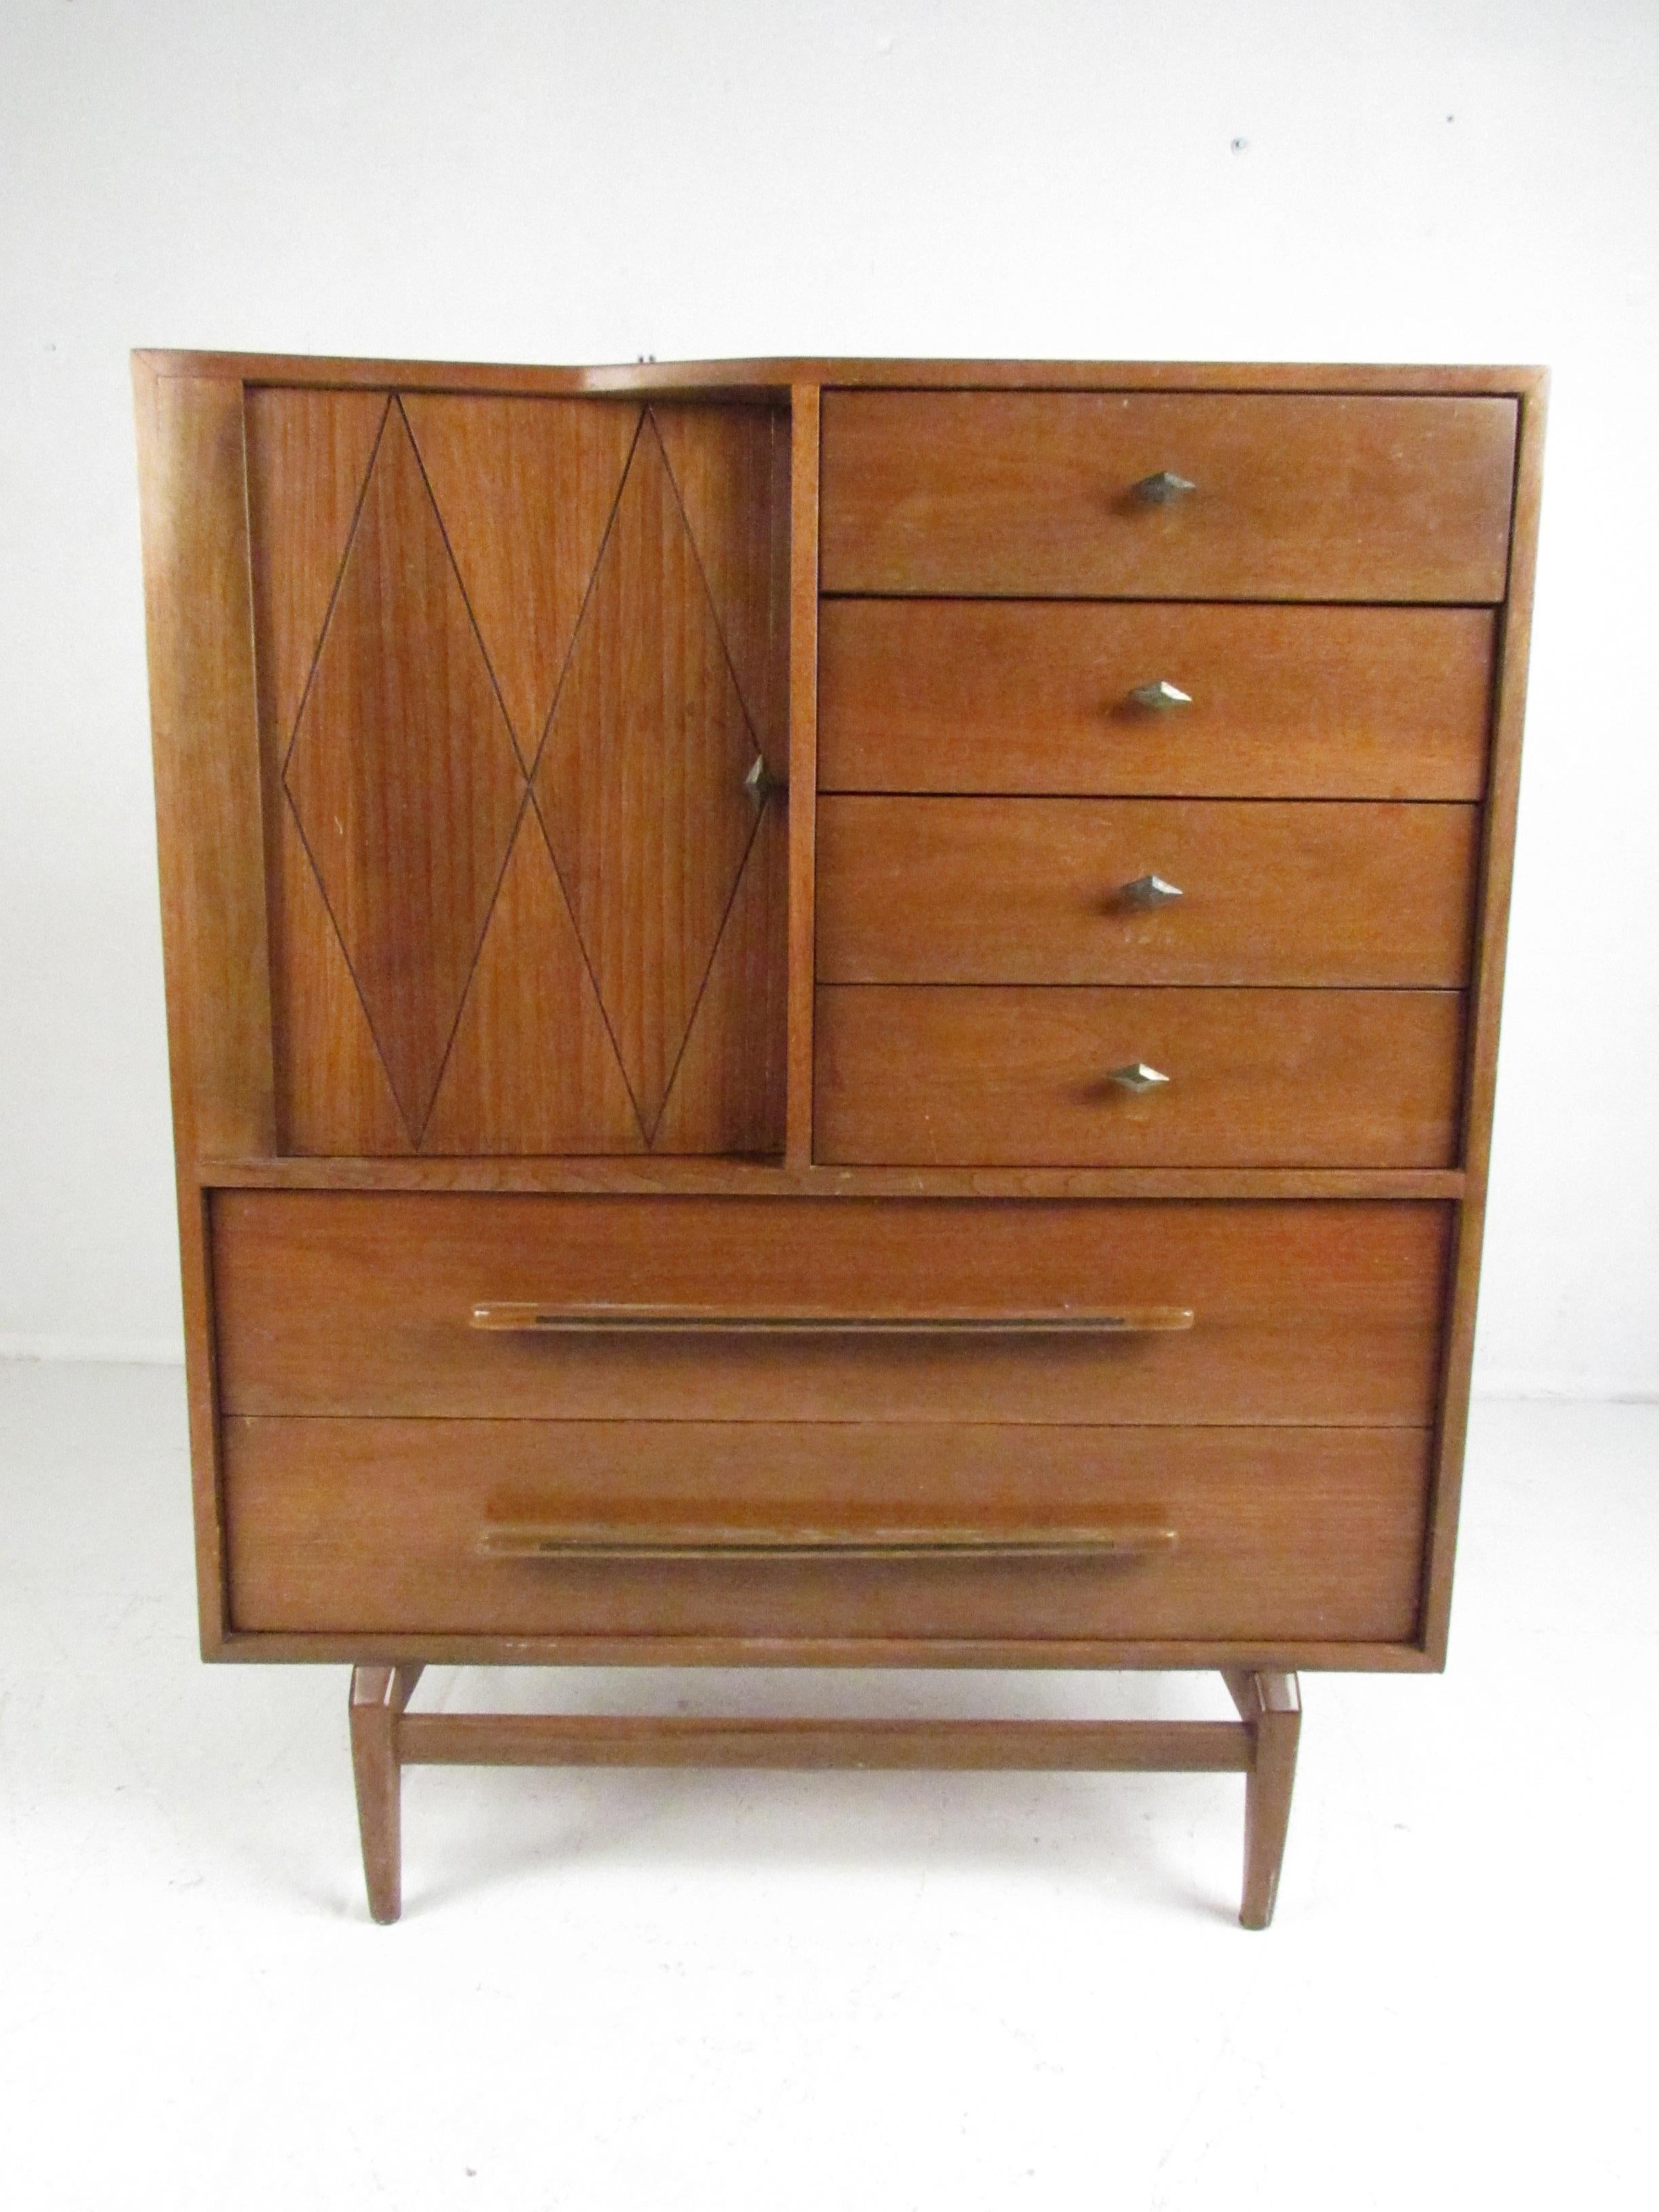 This beautiful vintage modern gentleman's chest boasts six hefty drawers and and large compartment with shelves hidden by a tambour door. A unique variety of drawer pulls, a sculpted top, and unusual angled legs add to the mid-century appeal. This